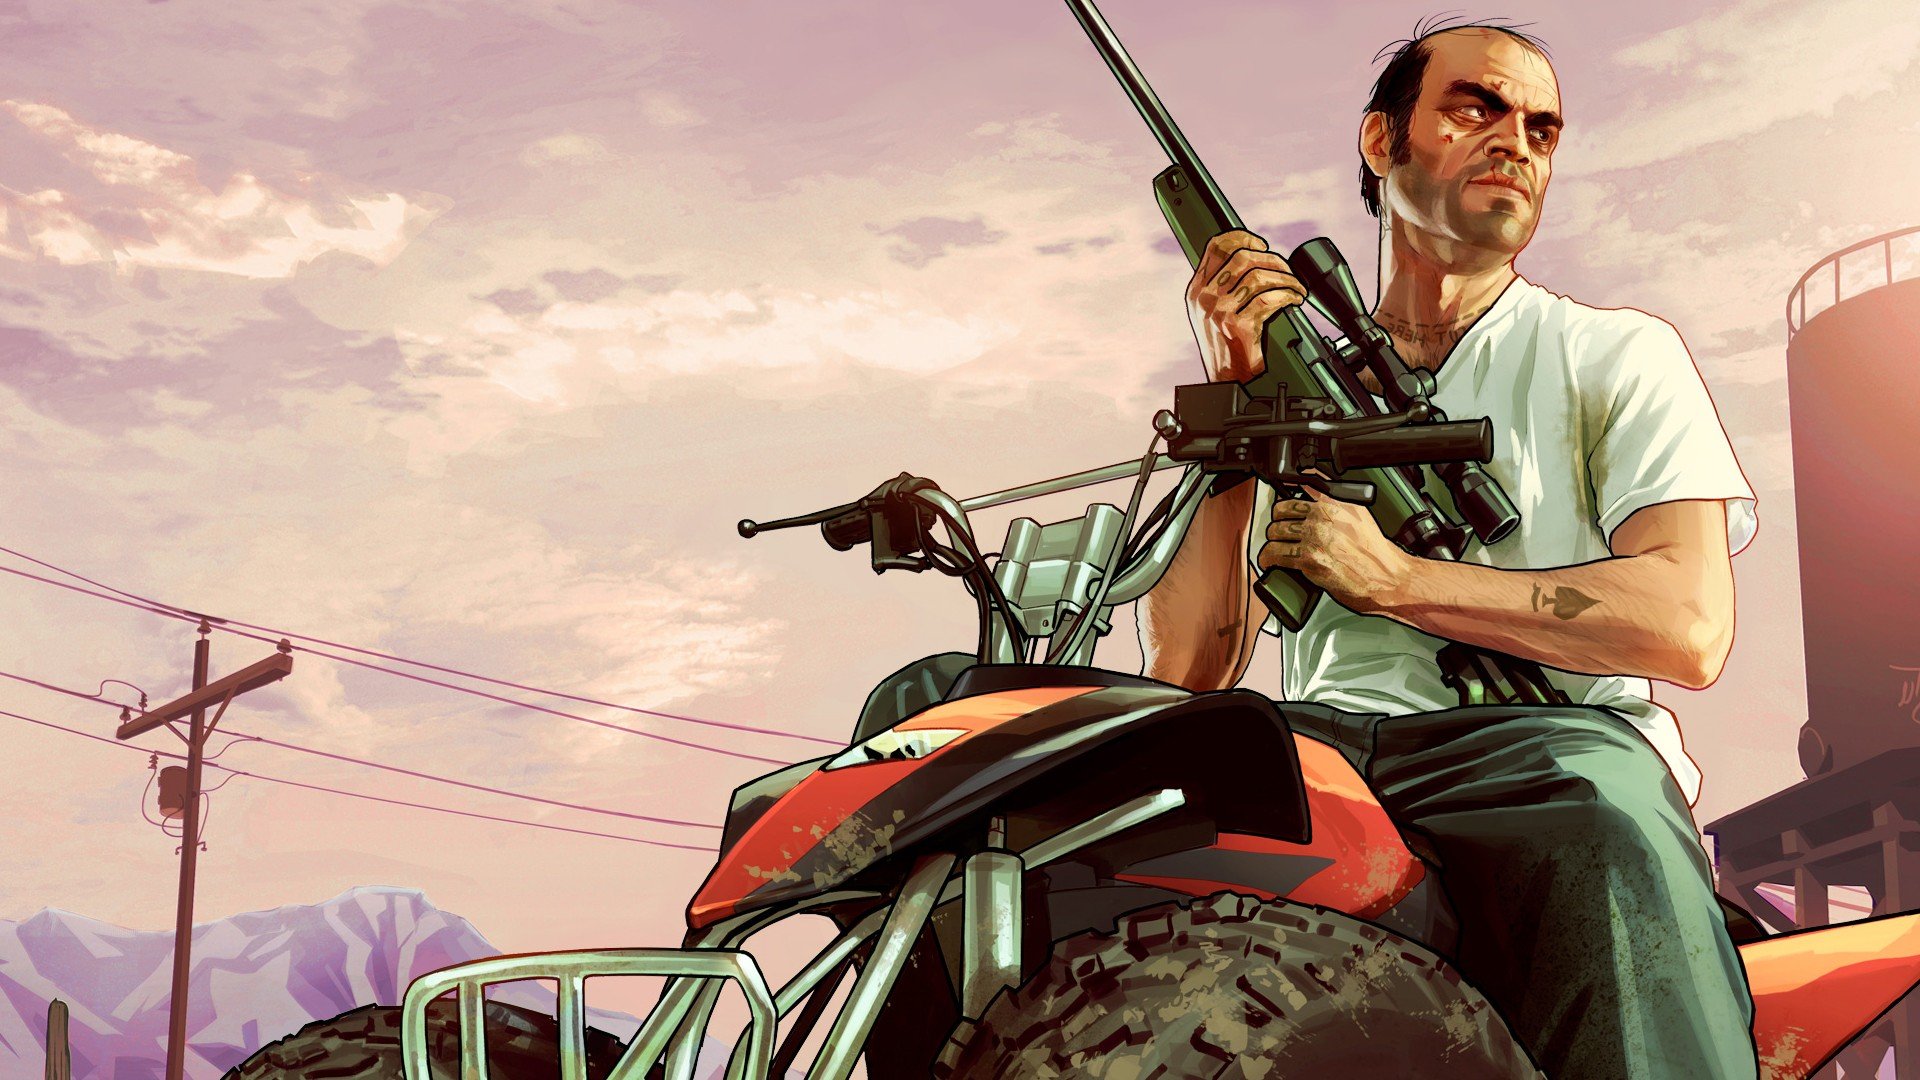 Download 1080p Grand Theft Auto V (GTA 5) PC background ID:195262 for free